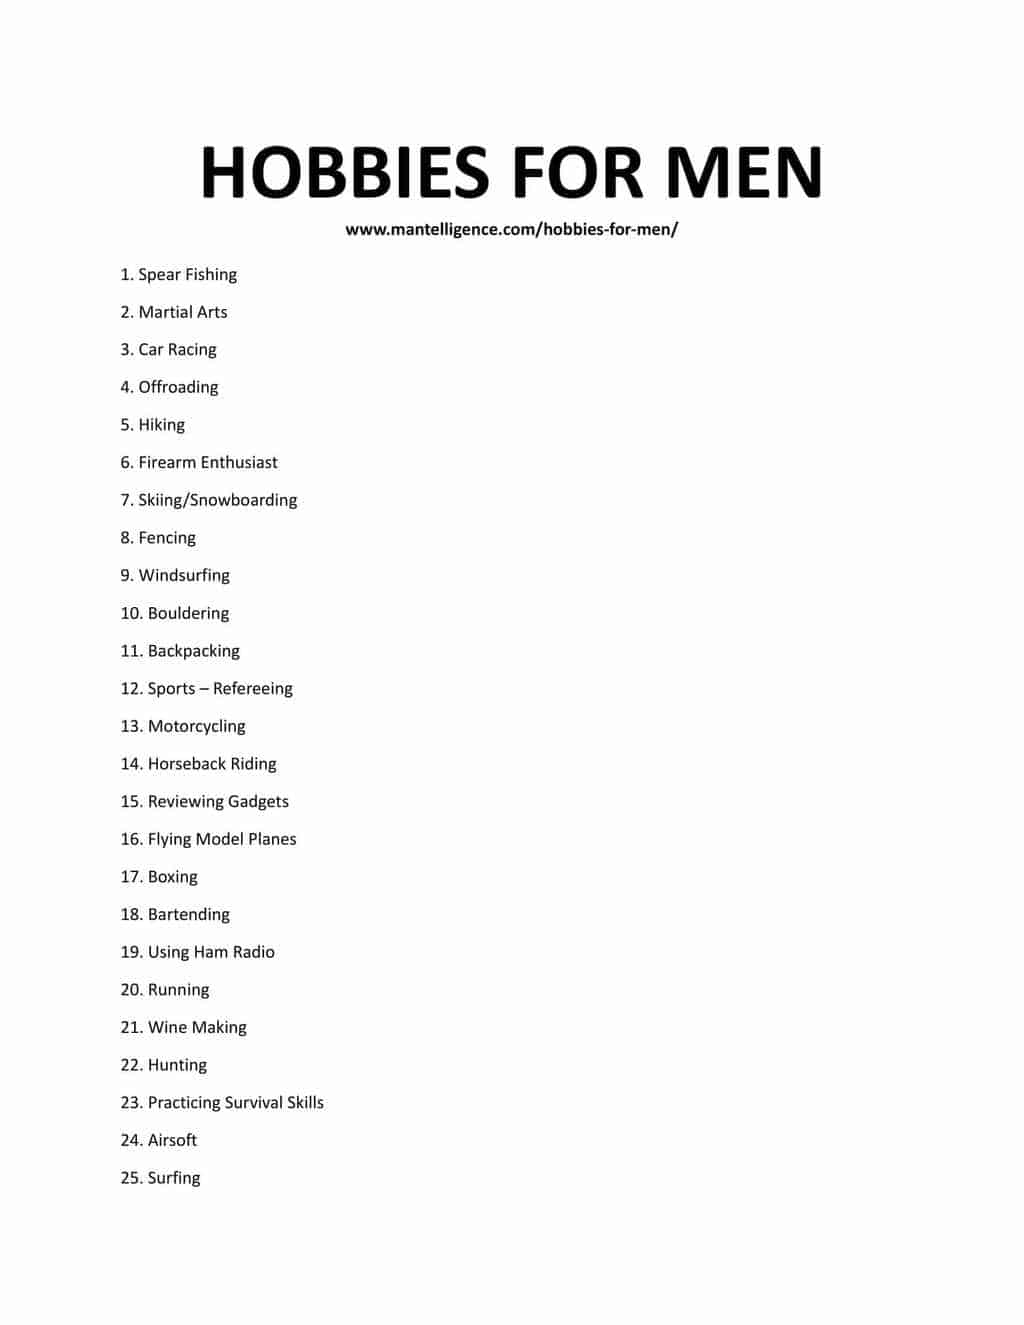 Downloadable and Printable list of hobbies for men